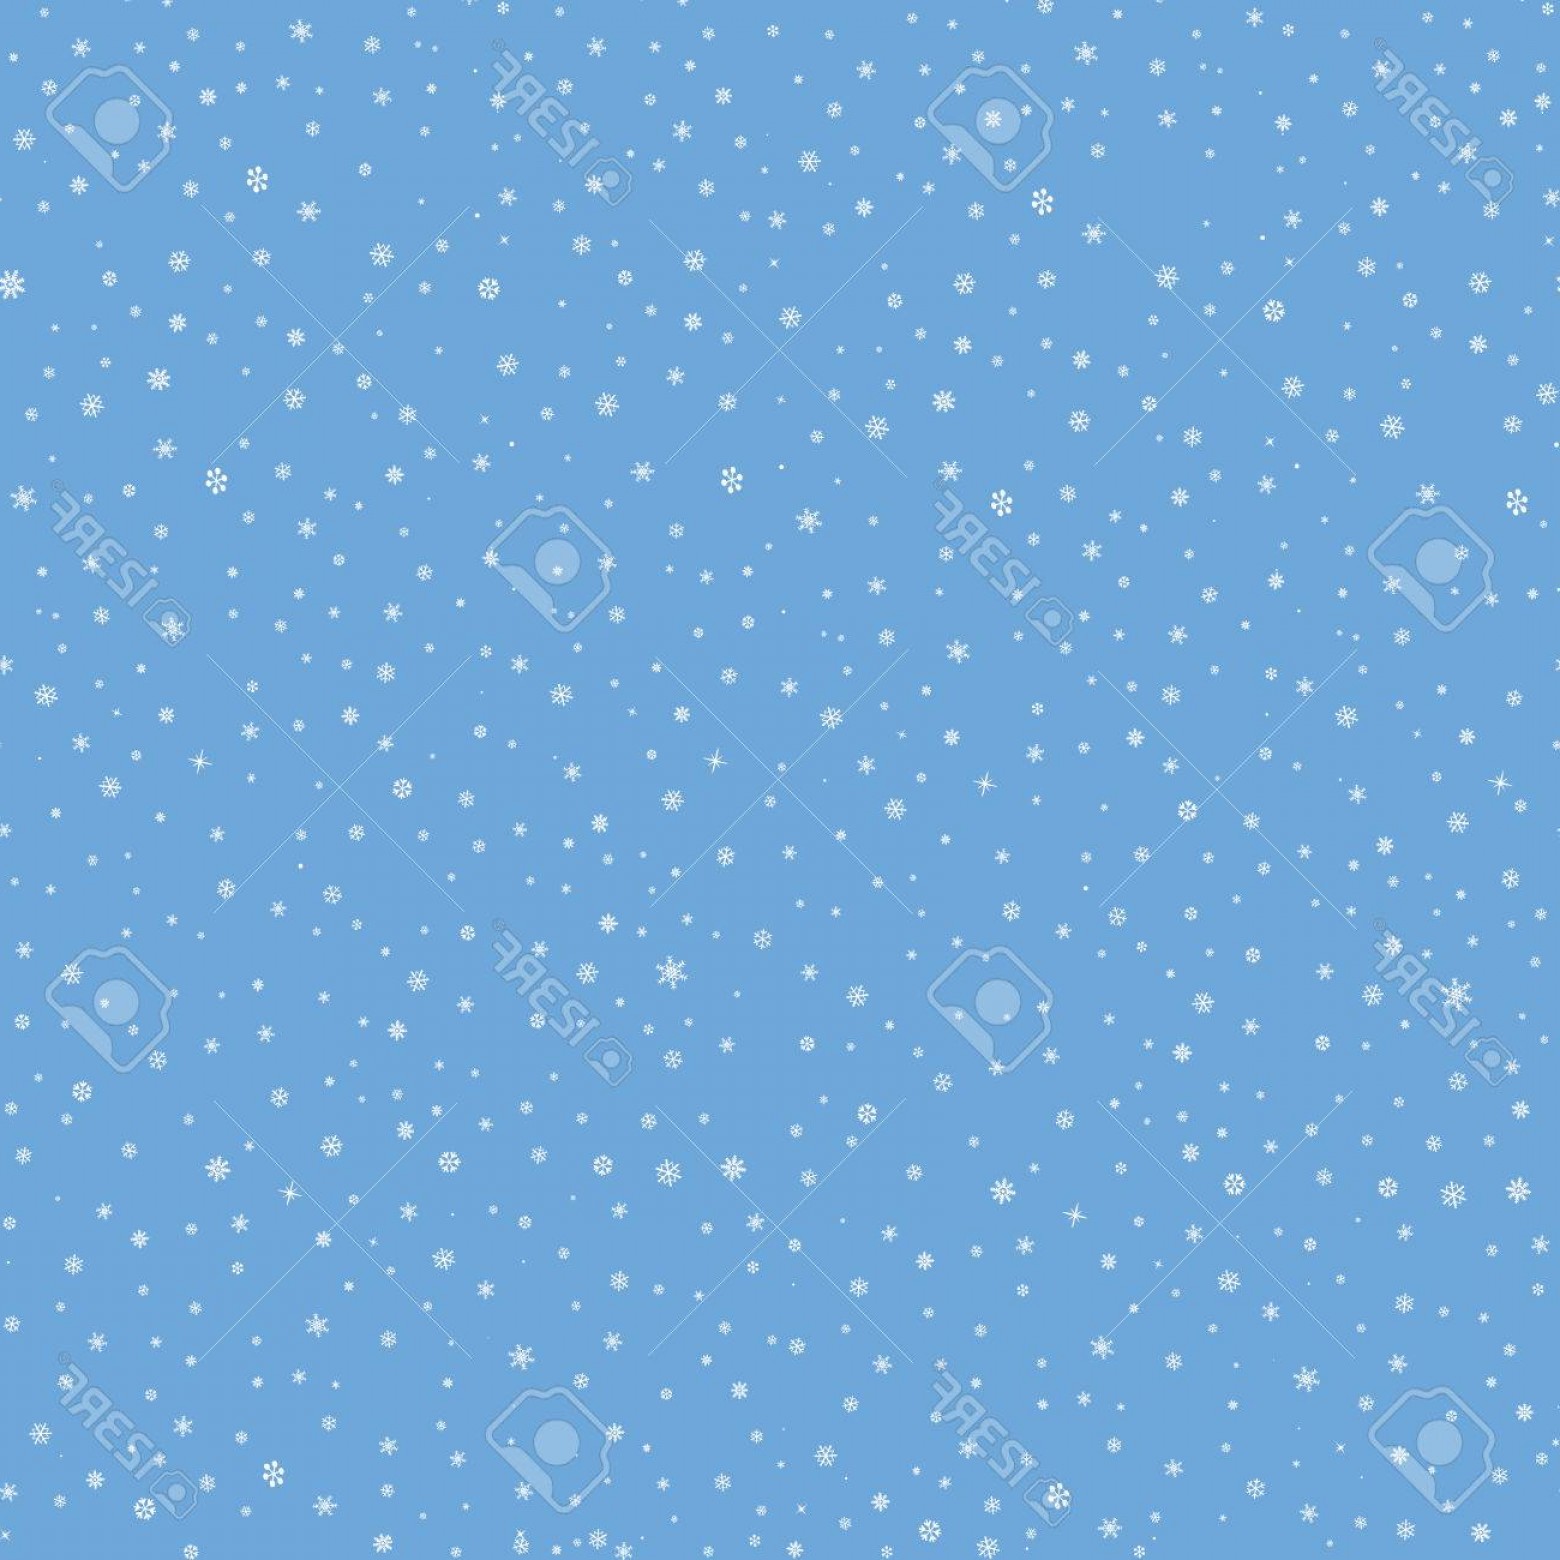 Snow Falling Vector at Vectorified.com | Collection of Snow Falling ...